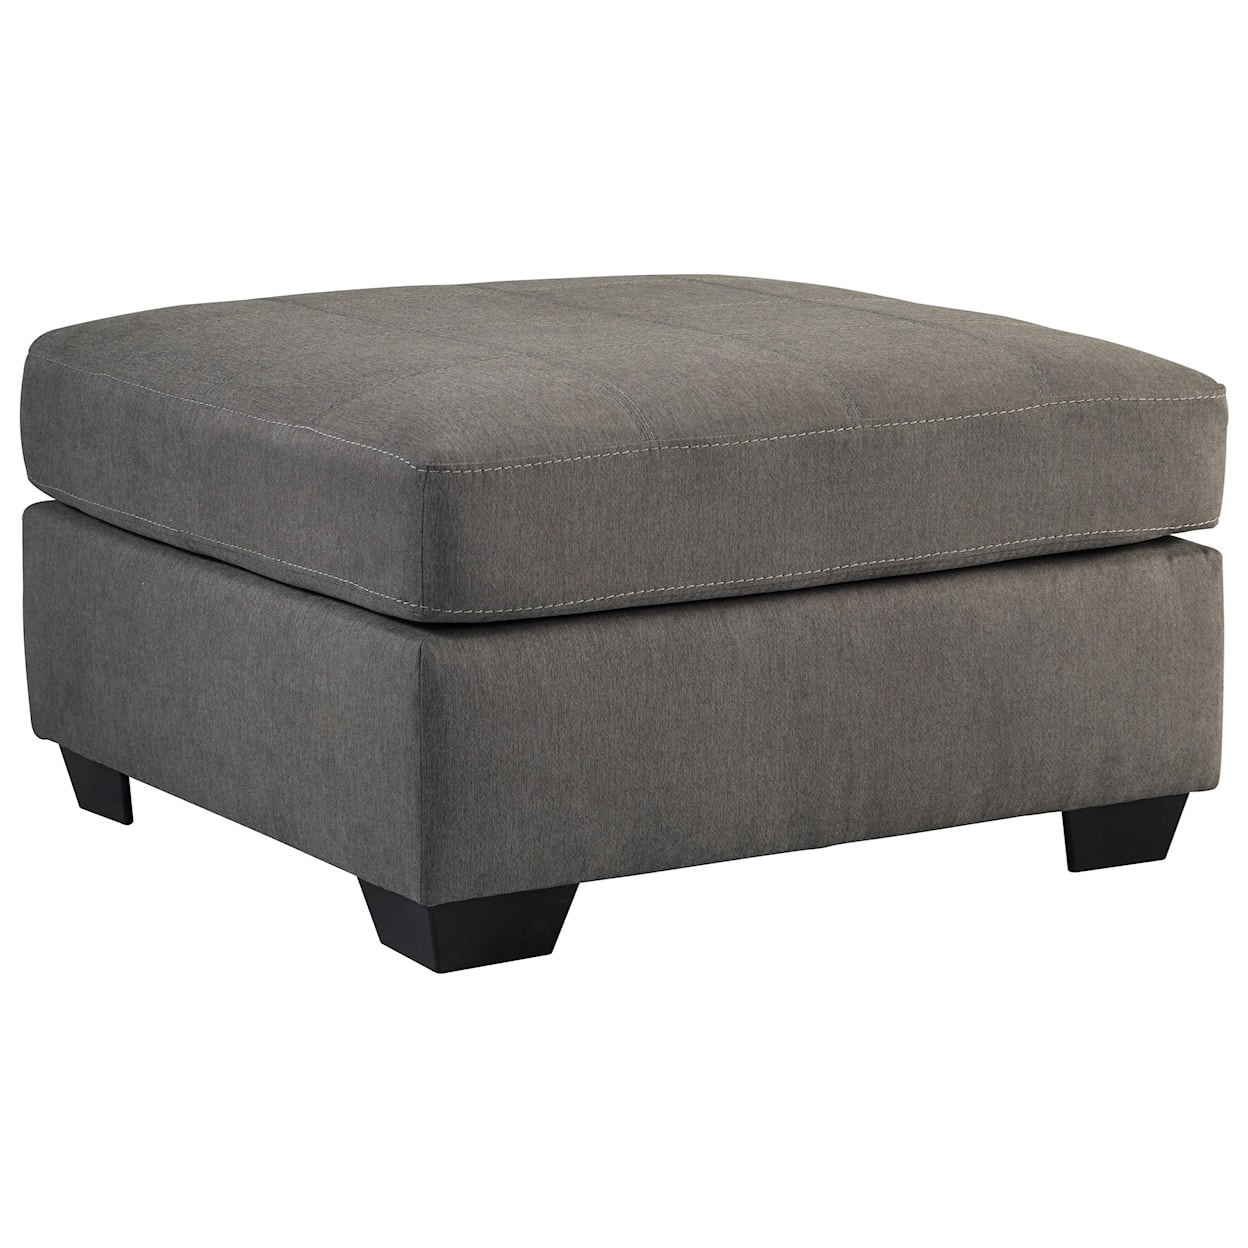 Benchcraft Maier Oversized Accent Ottoman